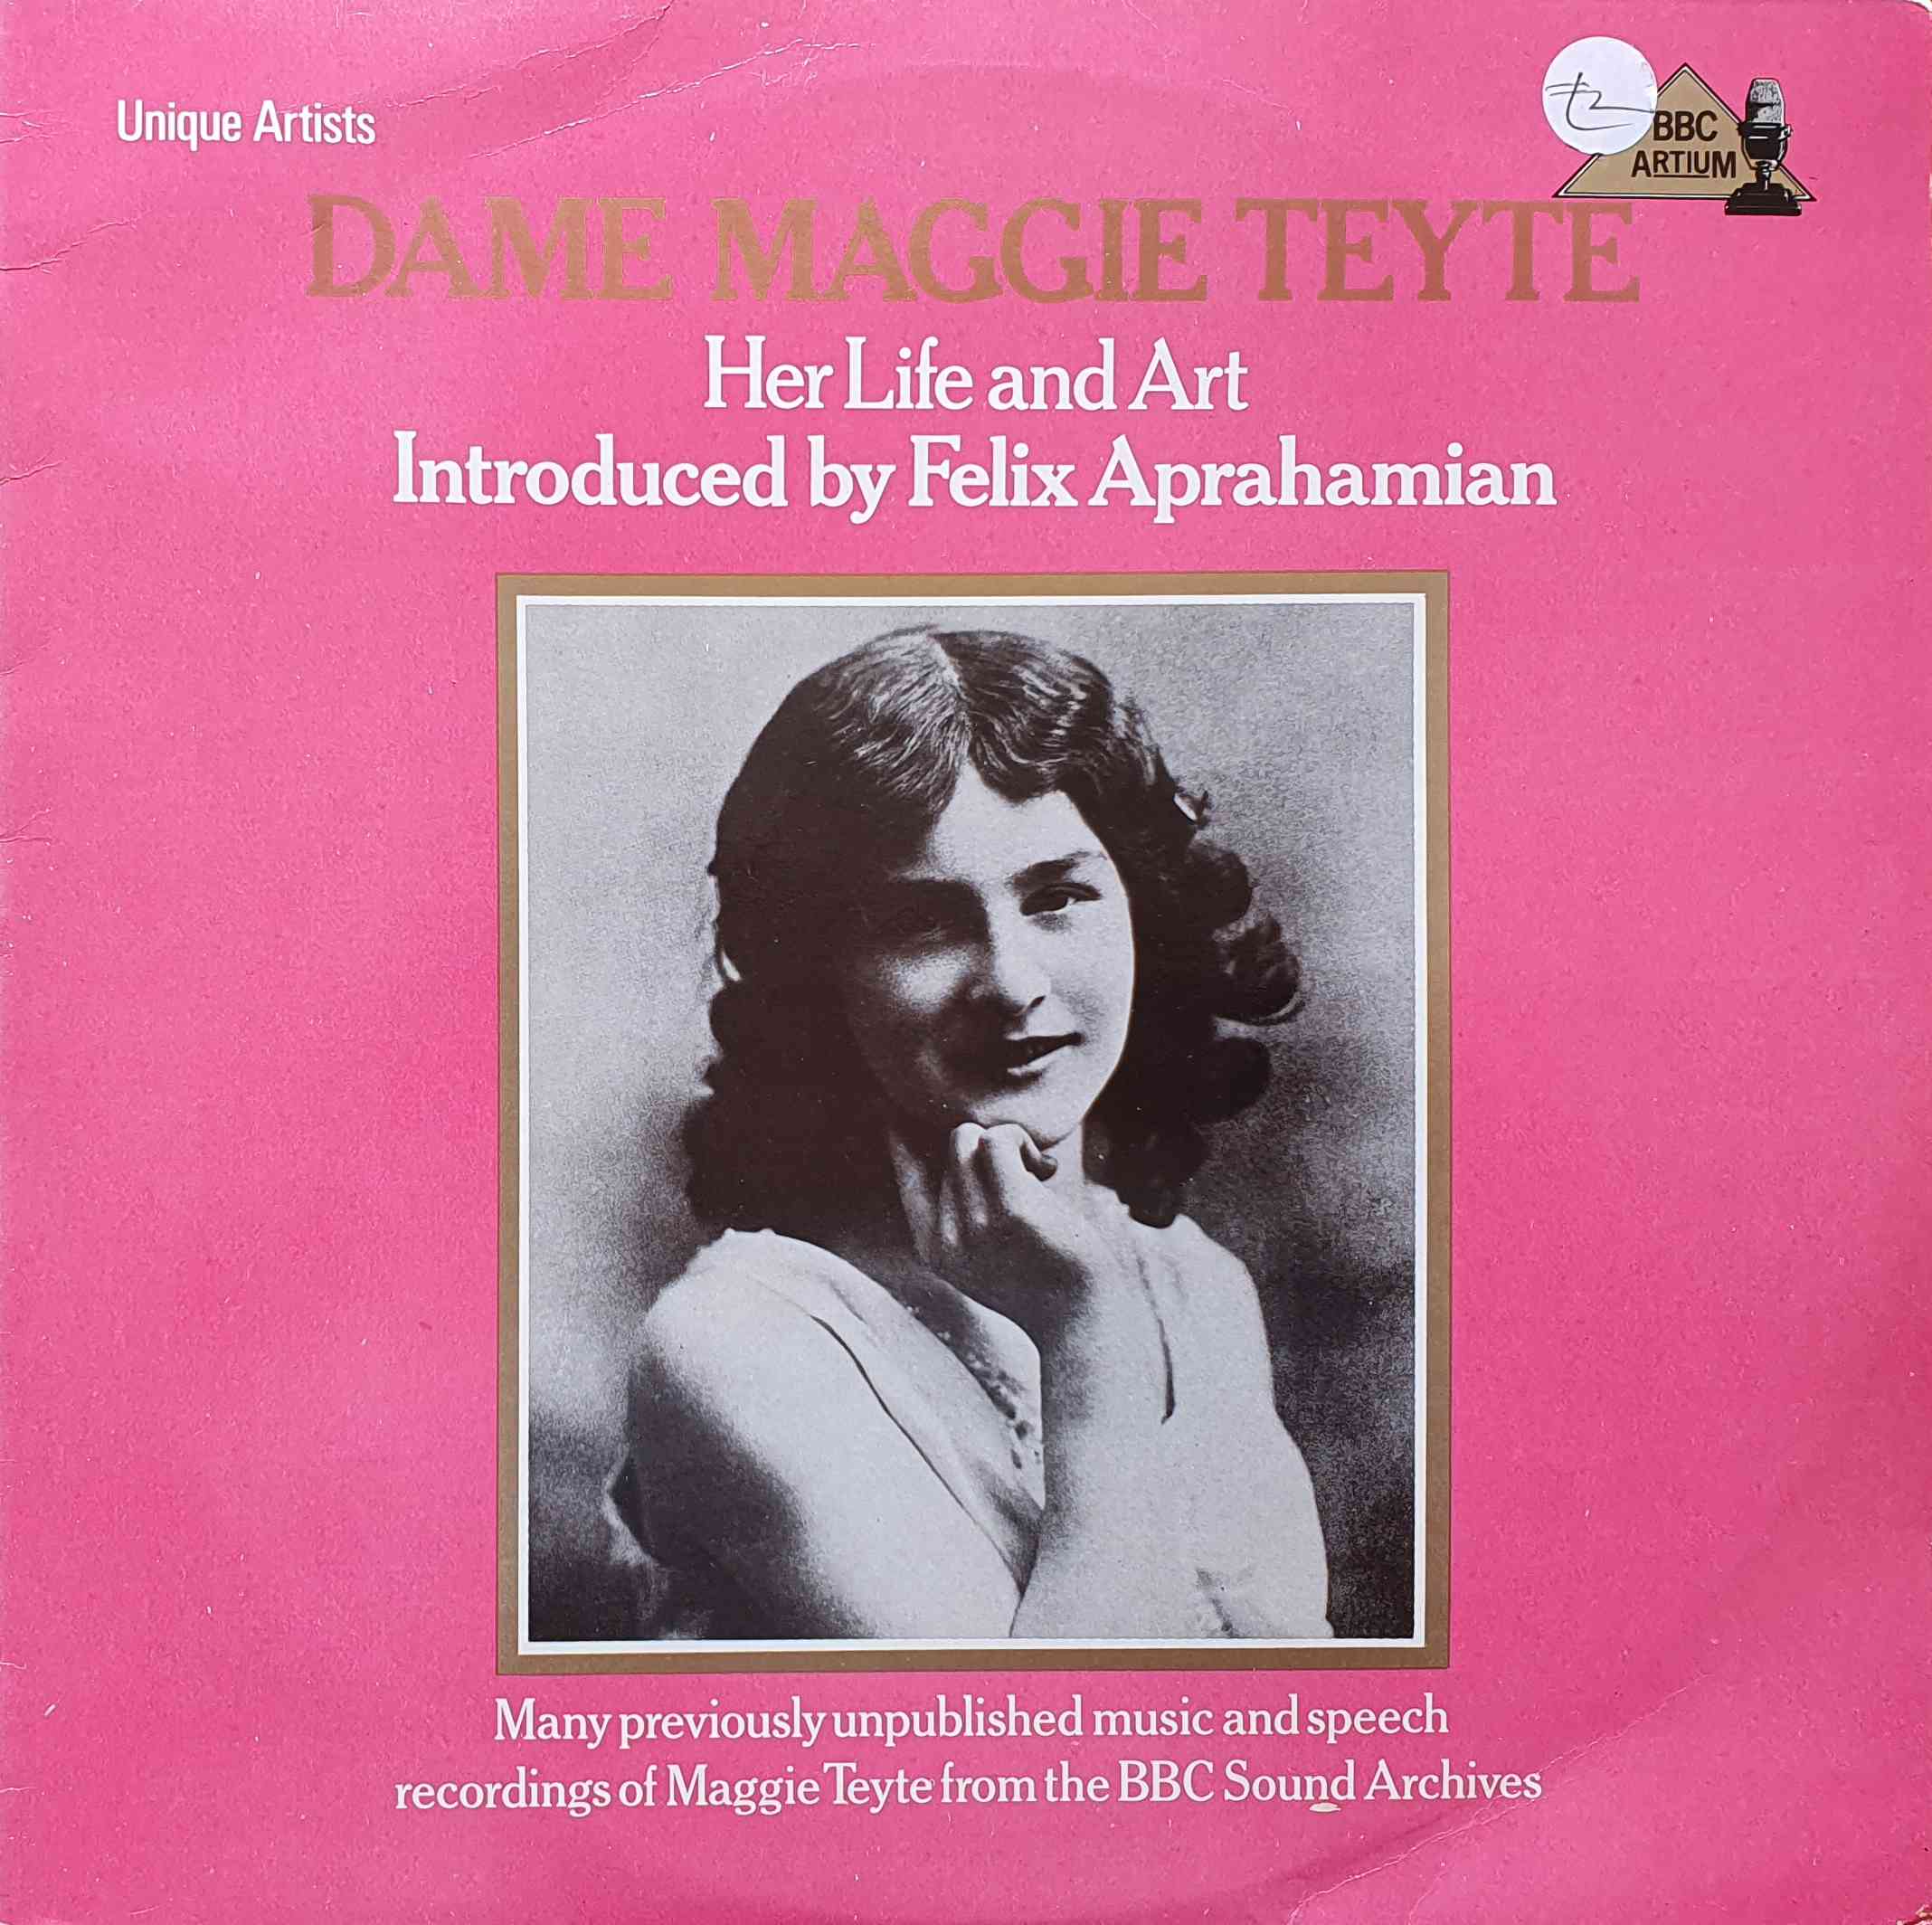 Picture of REGL 369 Dame Maggie Teyte by artist Dame Maggie Teyte from the BBC albums - Records and Tapes library